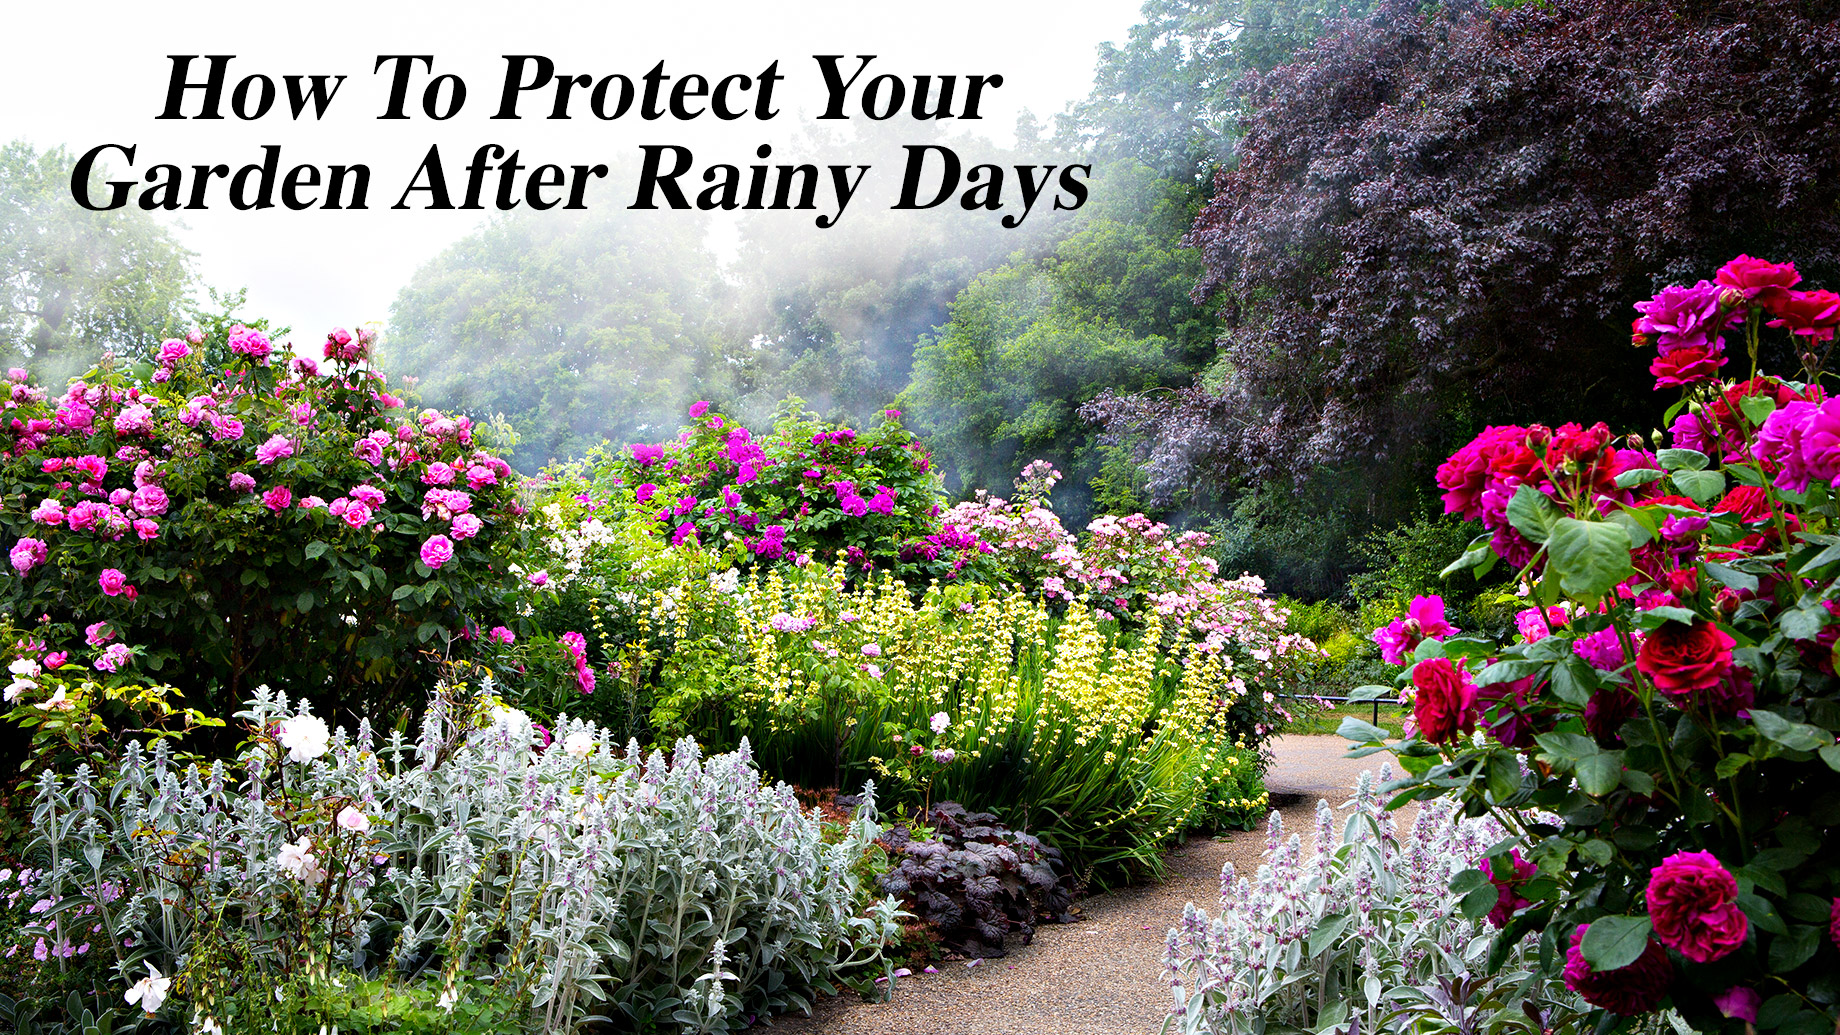 How To Protect Your Garden After Rainy Days